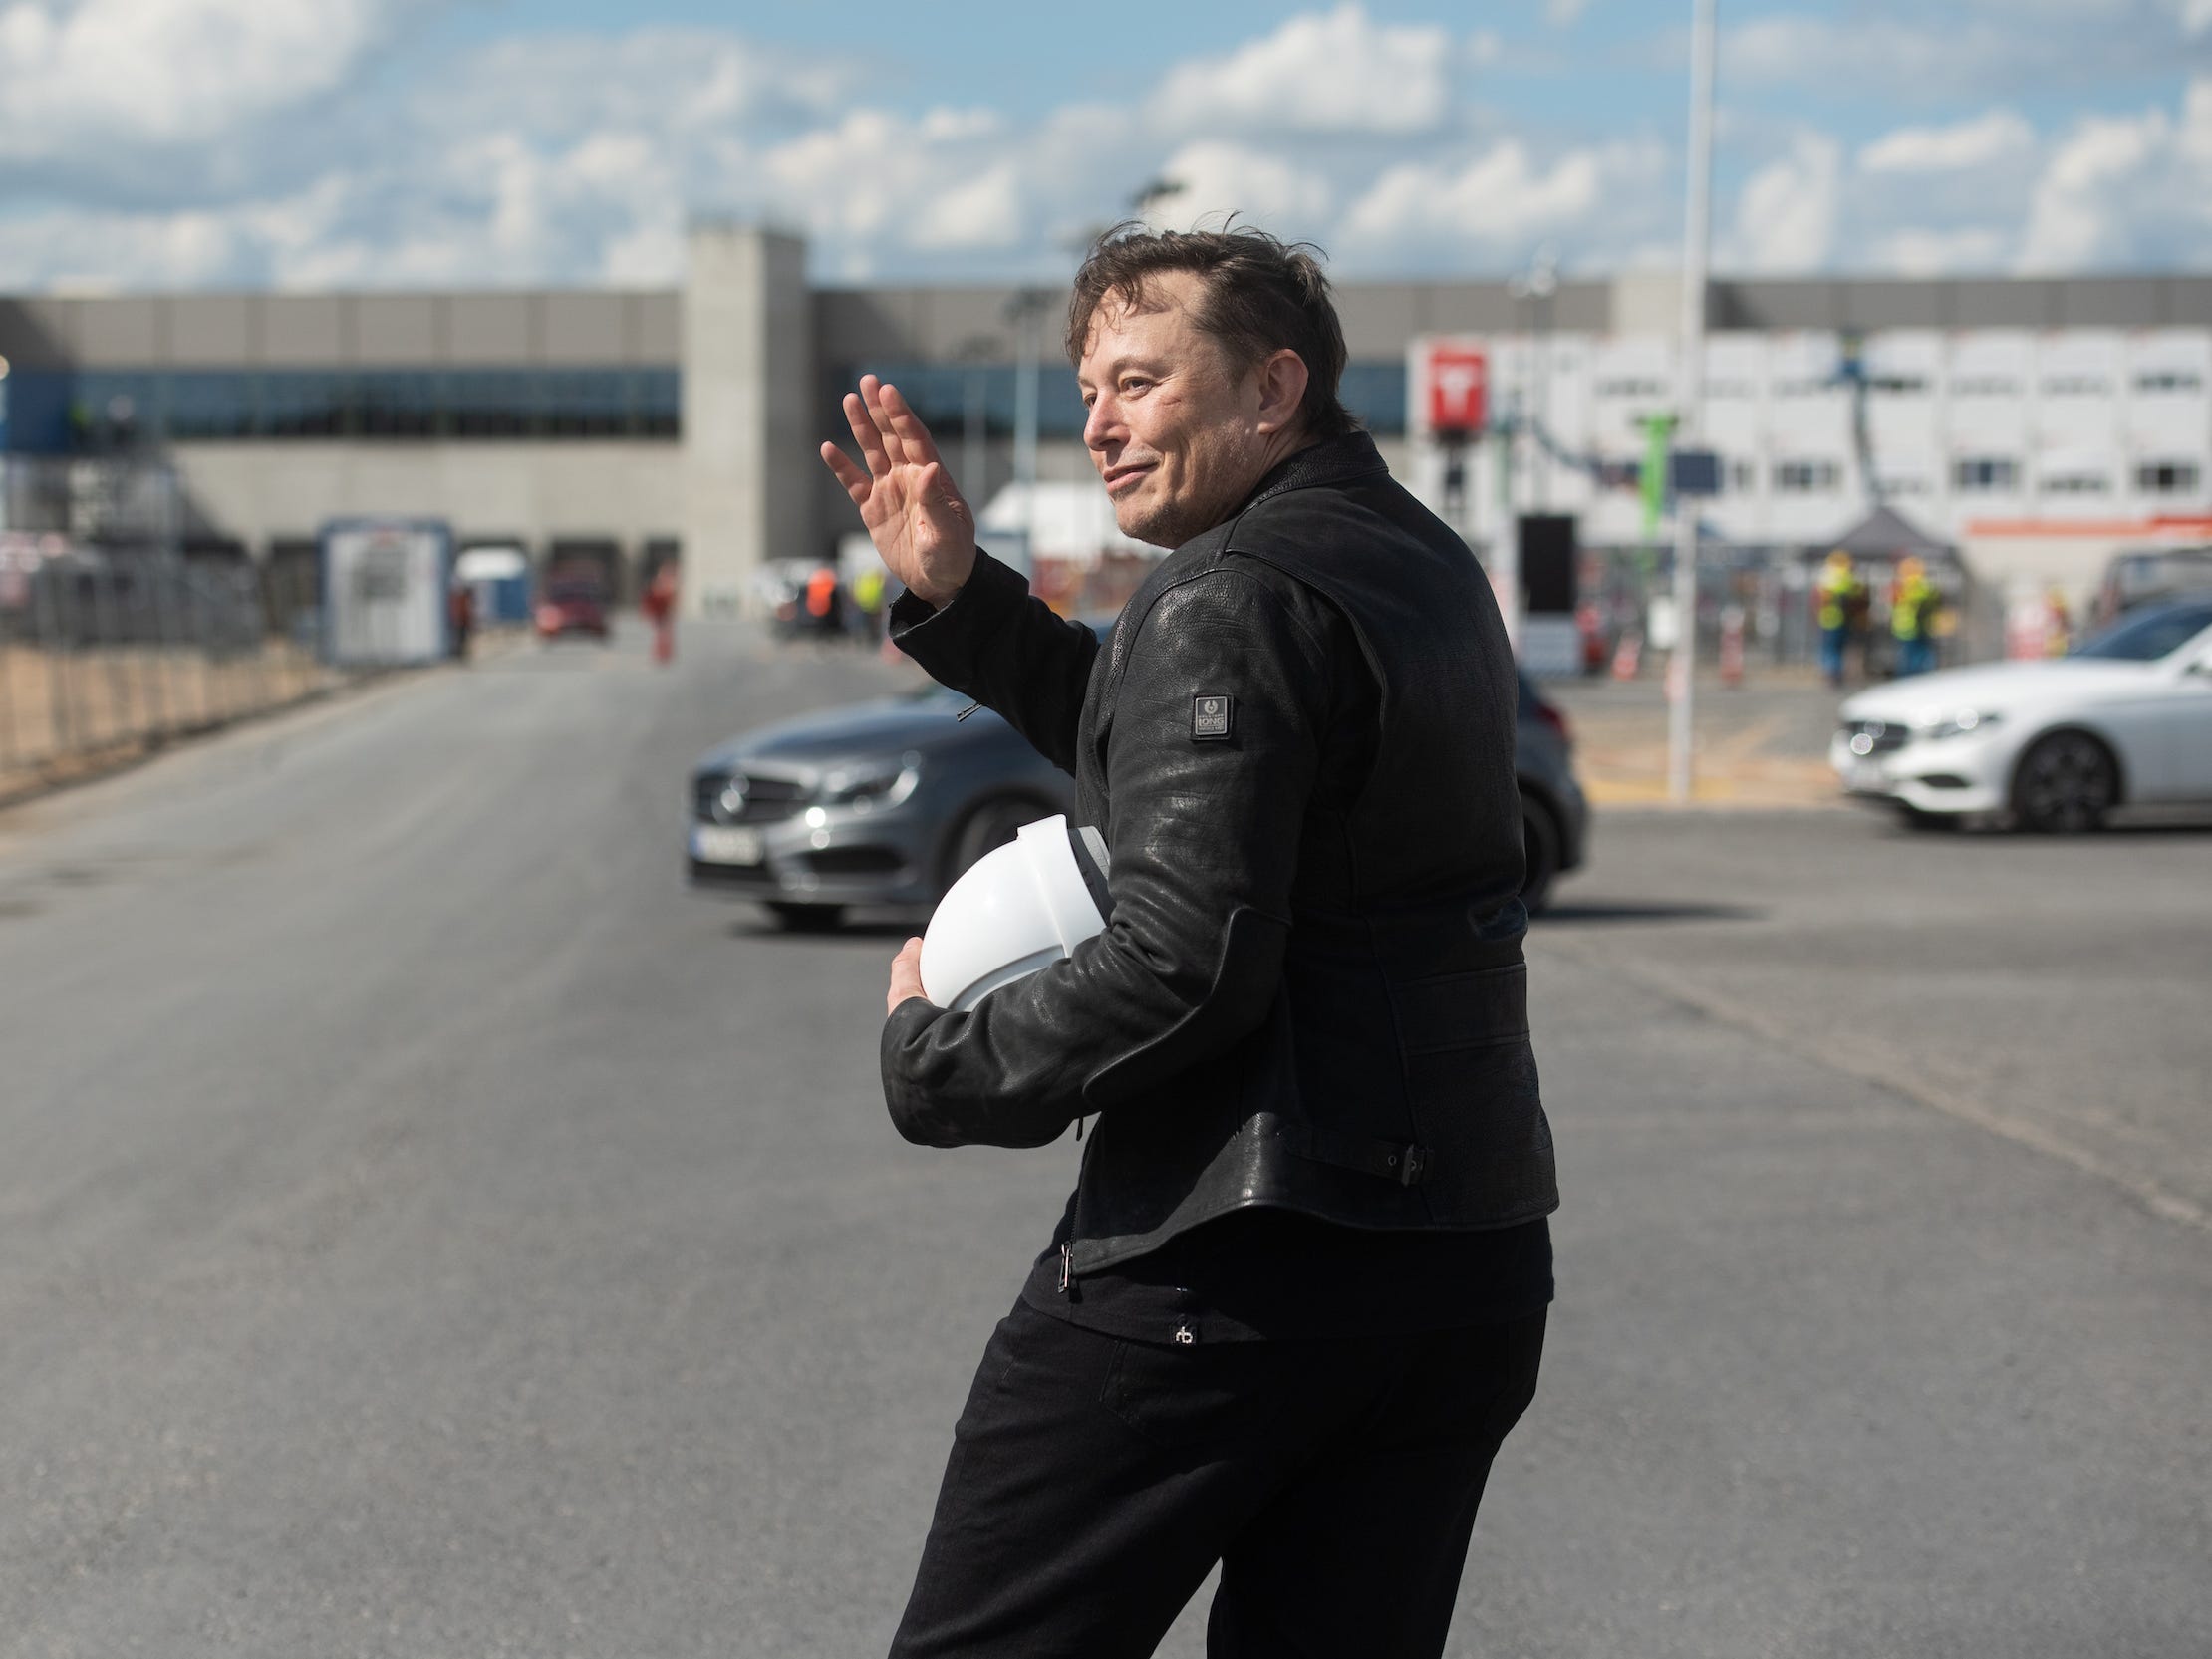 Tesla CEO Elon Musk visits the Gigafactory Berlin construction site on May 17, 2021.